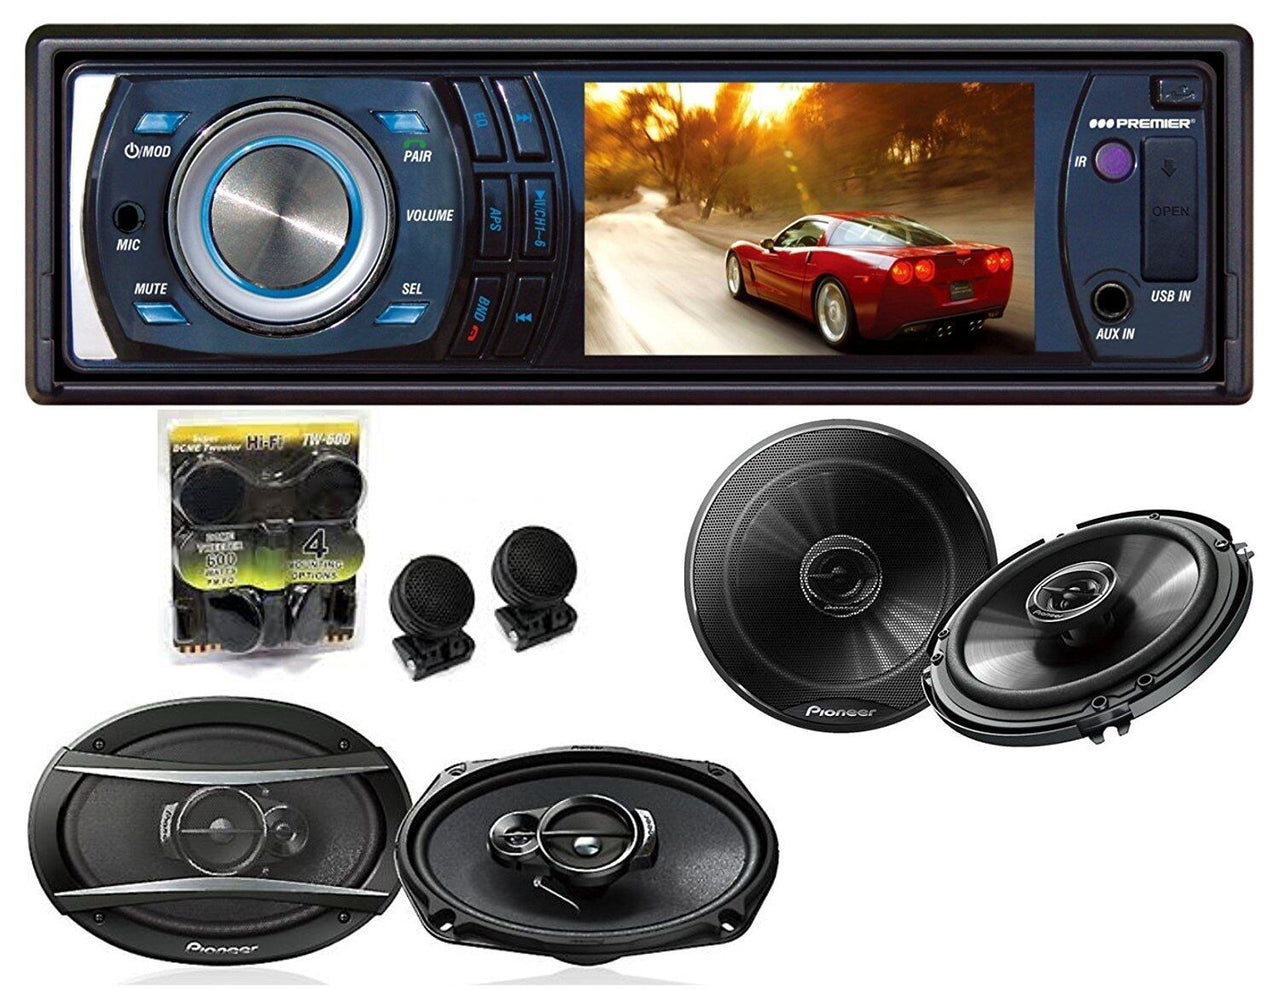 Absolute DMR380BTAD TS-G1645R TS-A6966R TW600<br/> In-Dash Single Din 3.5" TFT-LCD Monitor with DVD/CD/MP3 Receiver Detachable Face + Pioneer TS-G1645R 6.5", TS-A6966R 6x9 & TW600